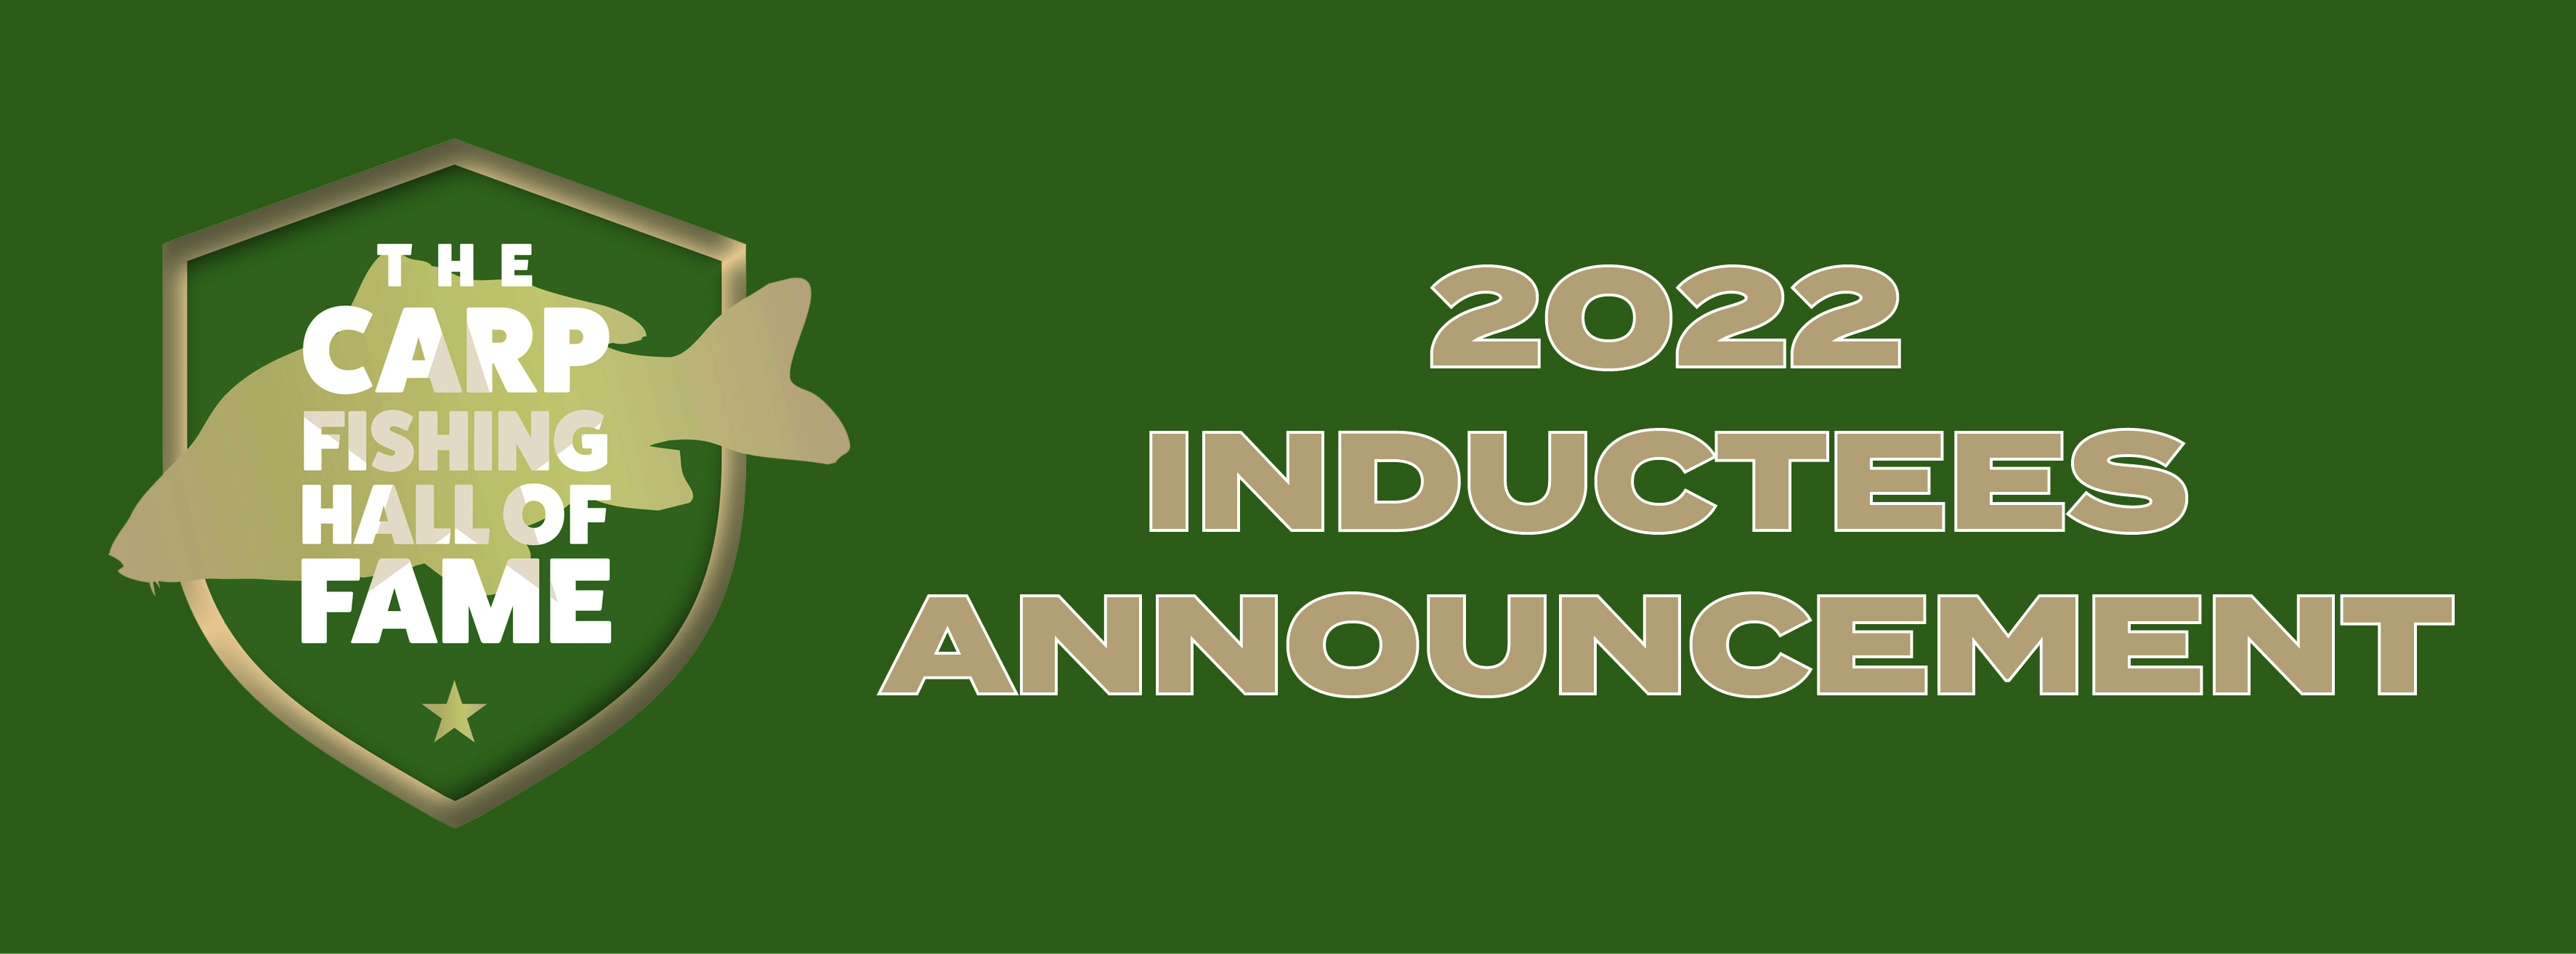 Carp Fishing Hall of Fame 2022 Inductees